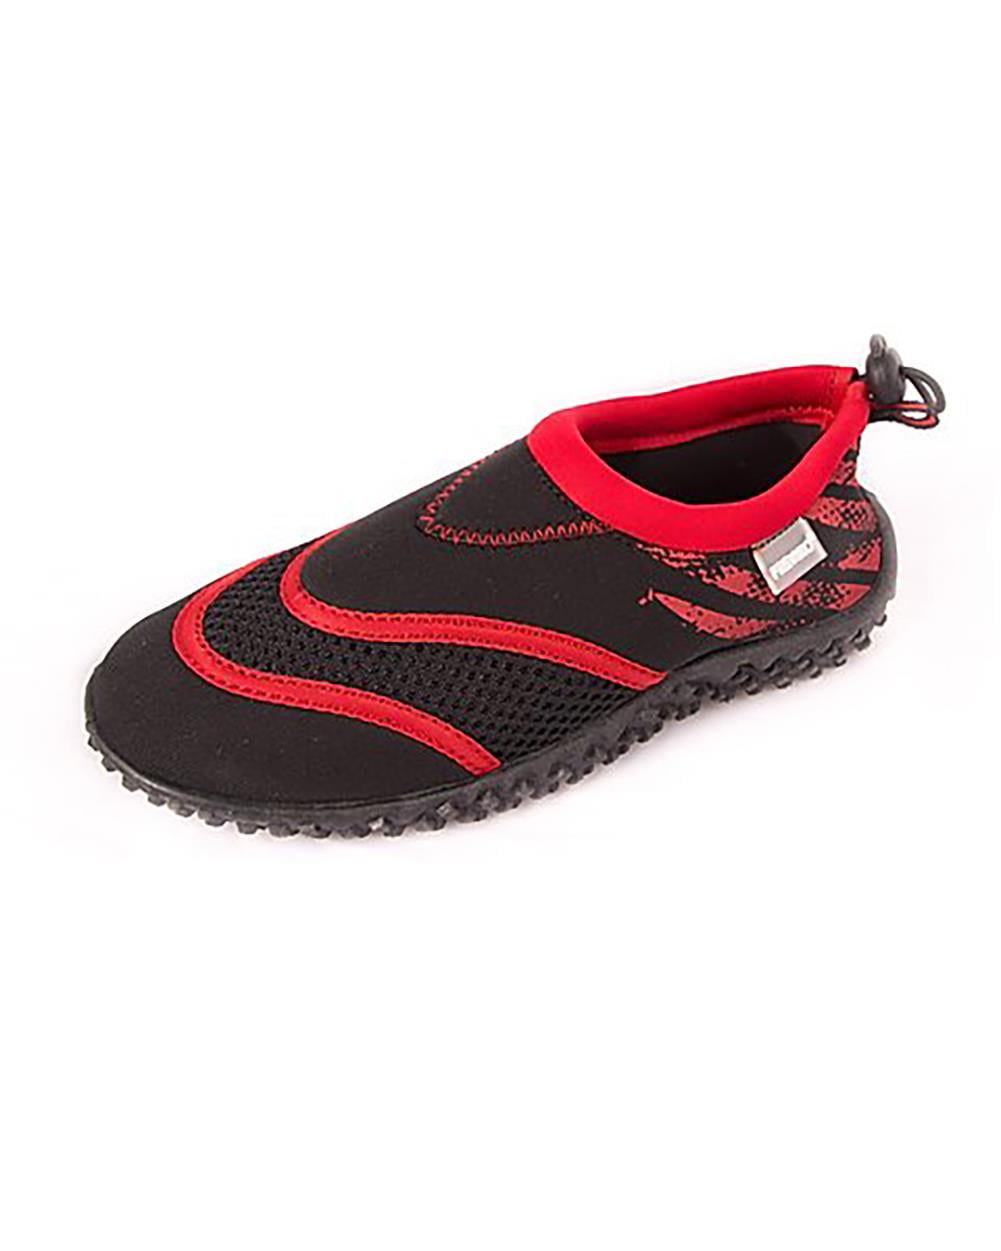 girls red shoes size 13